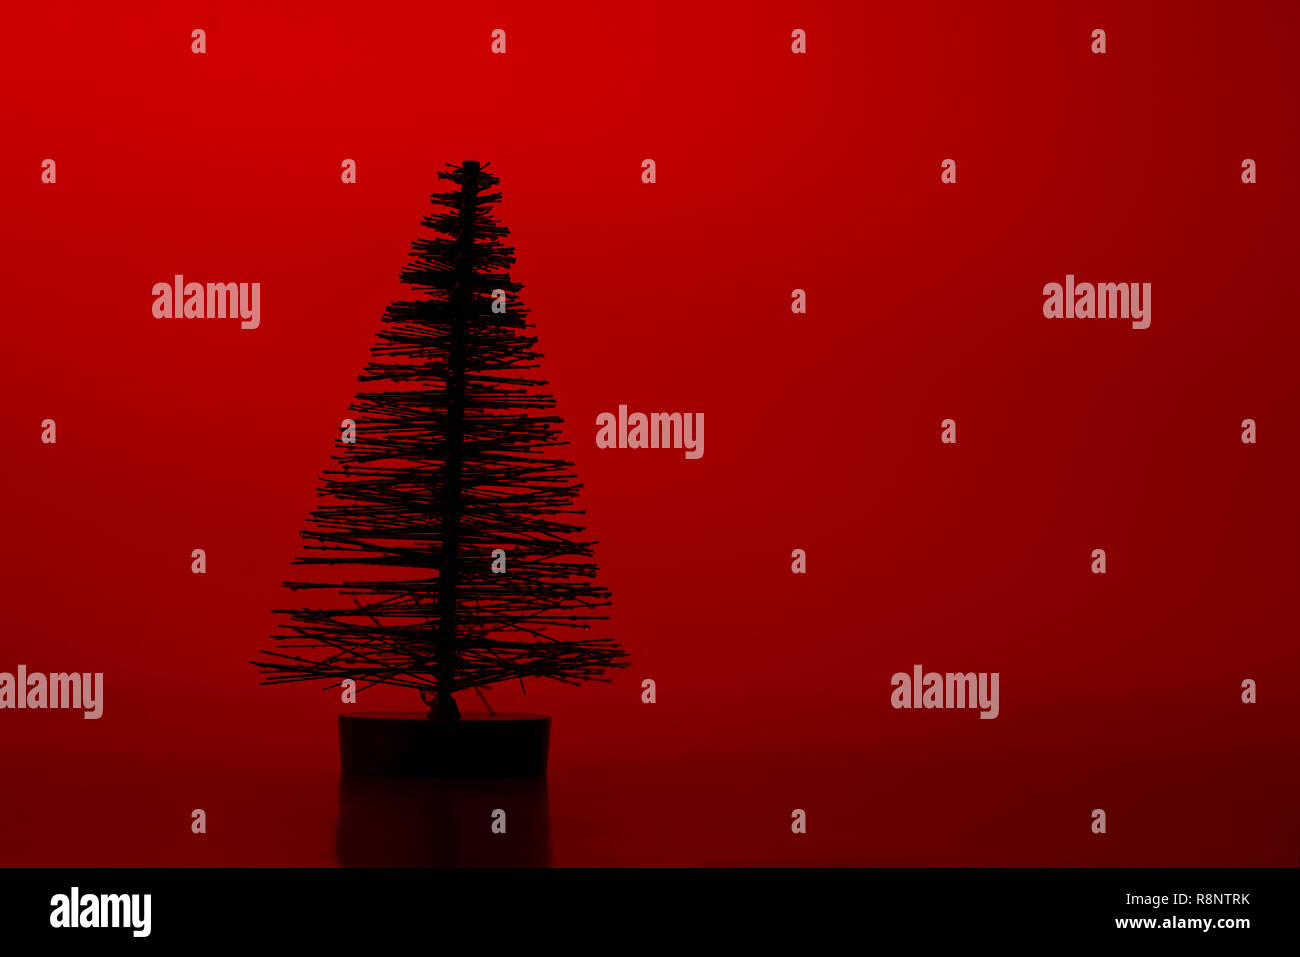 One silhouette artificial pine tree on a red background. Stock Photo